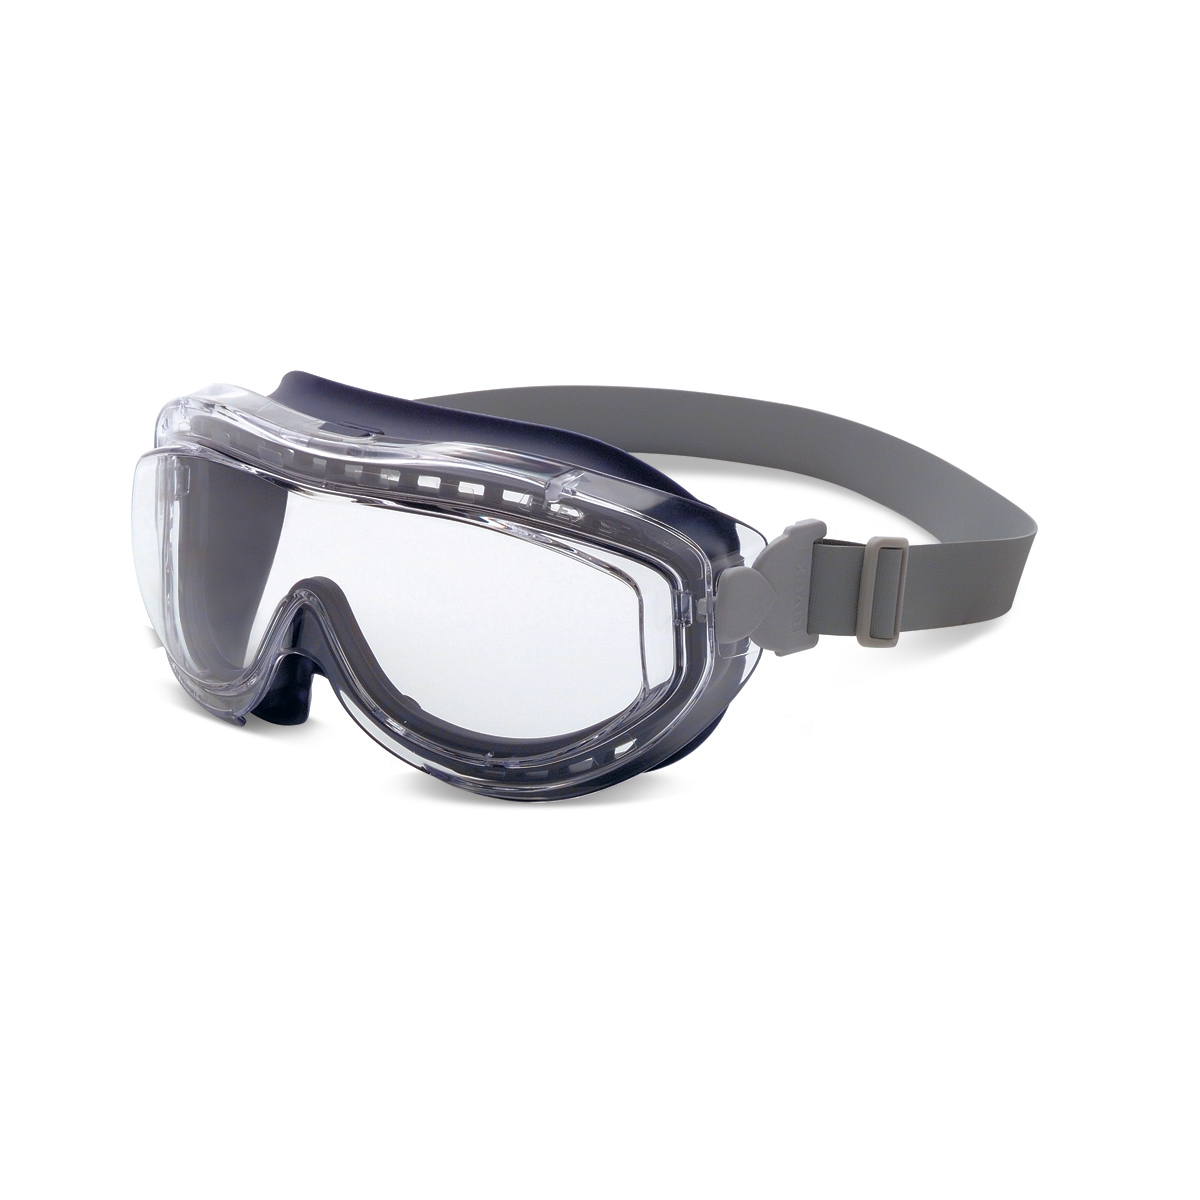 Uvex® by Honeywell Flex Seal® Impact Splash Goggles With Blue Low Profile Frame And Clear Uvex Hydroshield® Anti-Fog Lens